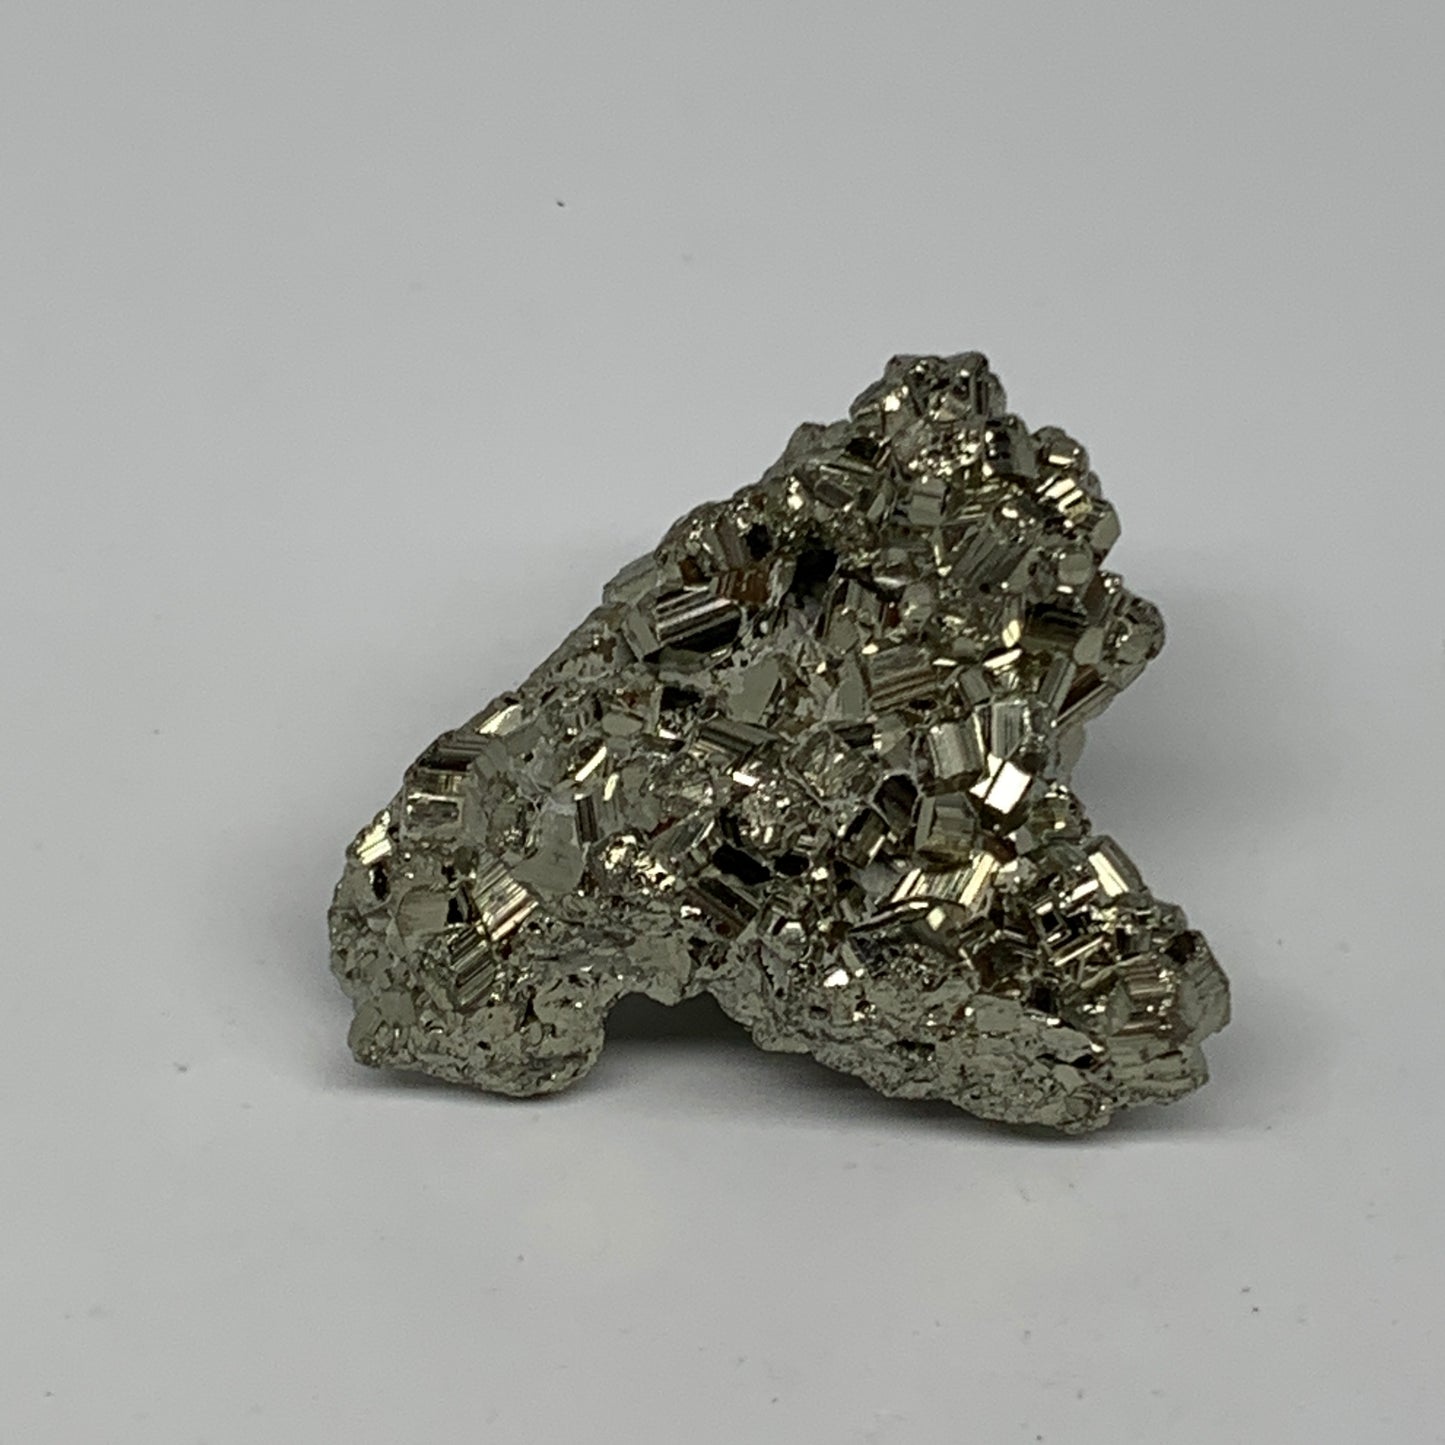 75.4g, 2"x1.8"x1.2", Natural Untreated Pyrite Cluster Mineral Specimens,B19386